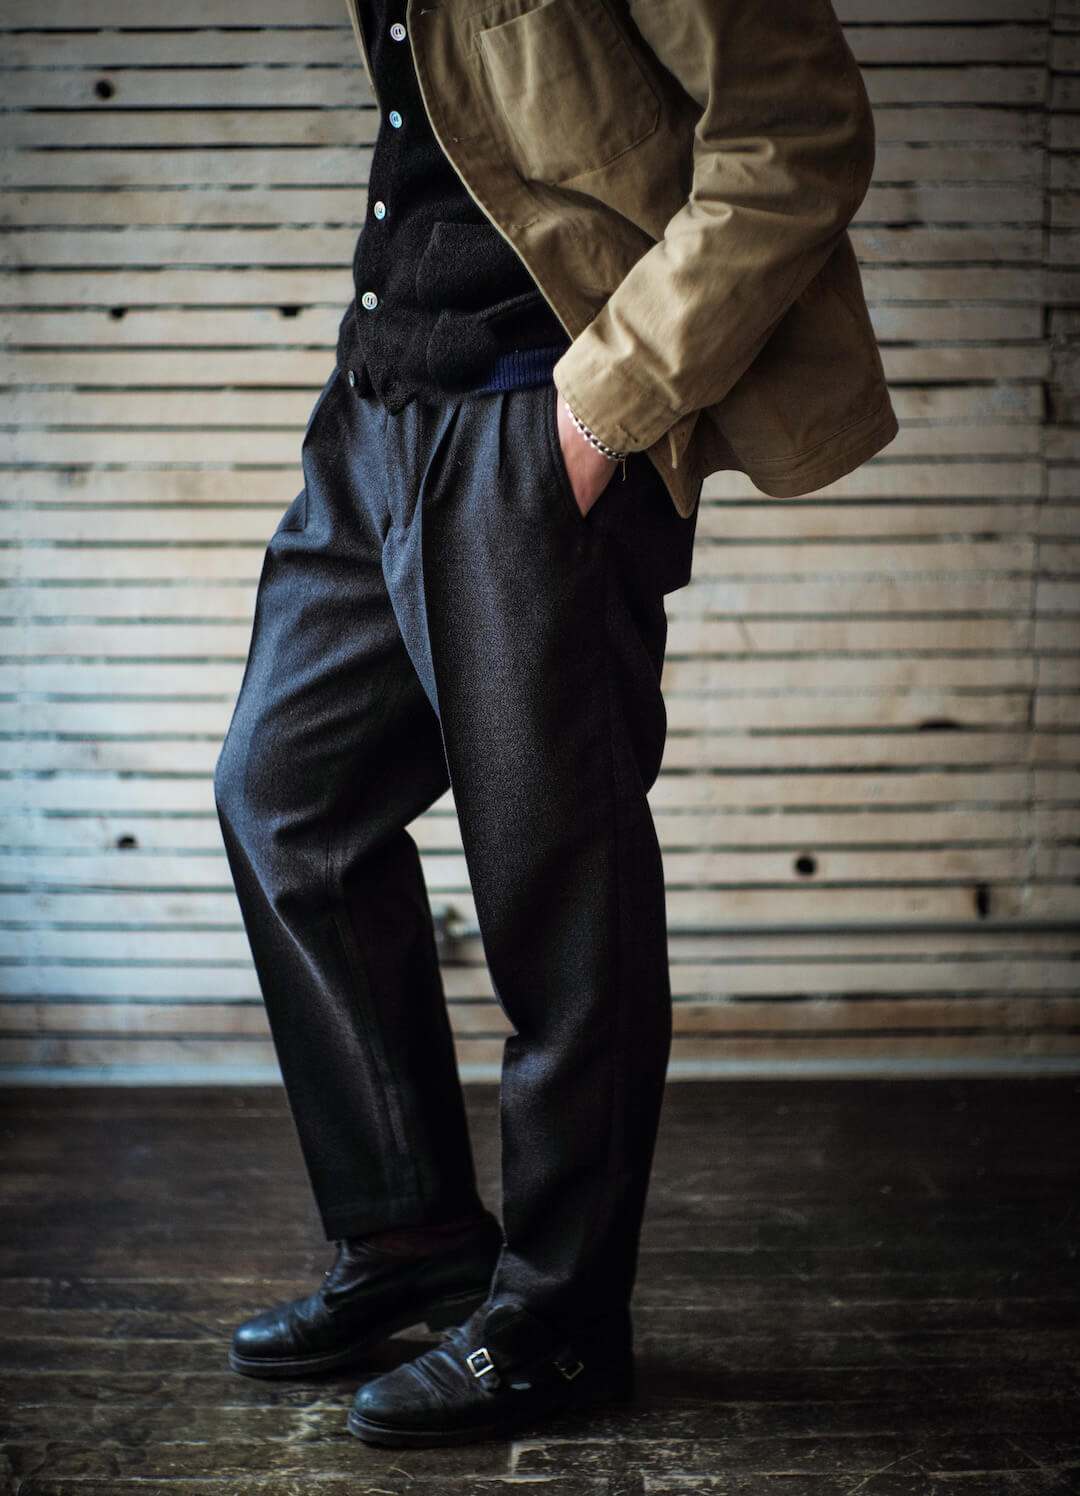 GULF STREAM PANTS "THORNPROOF"(Arch Exclusive)